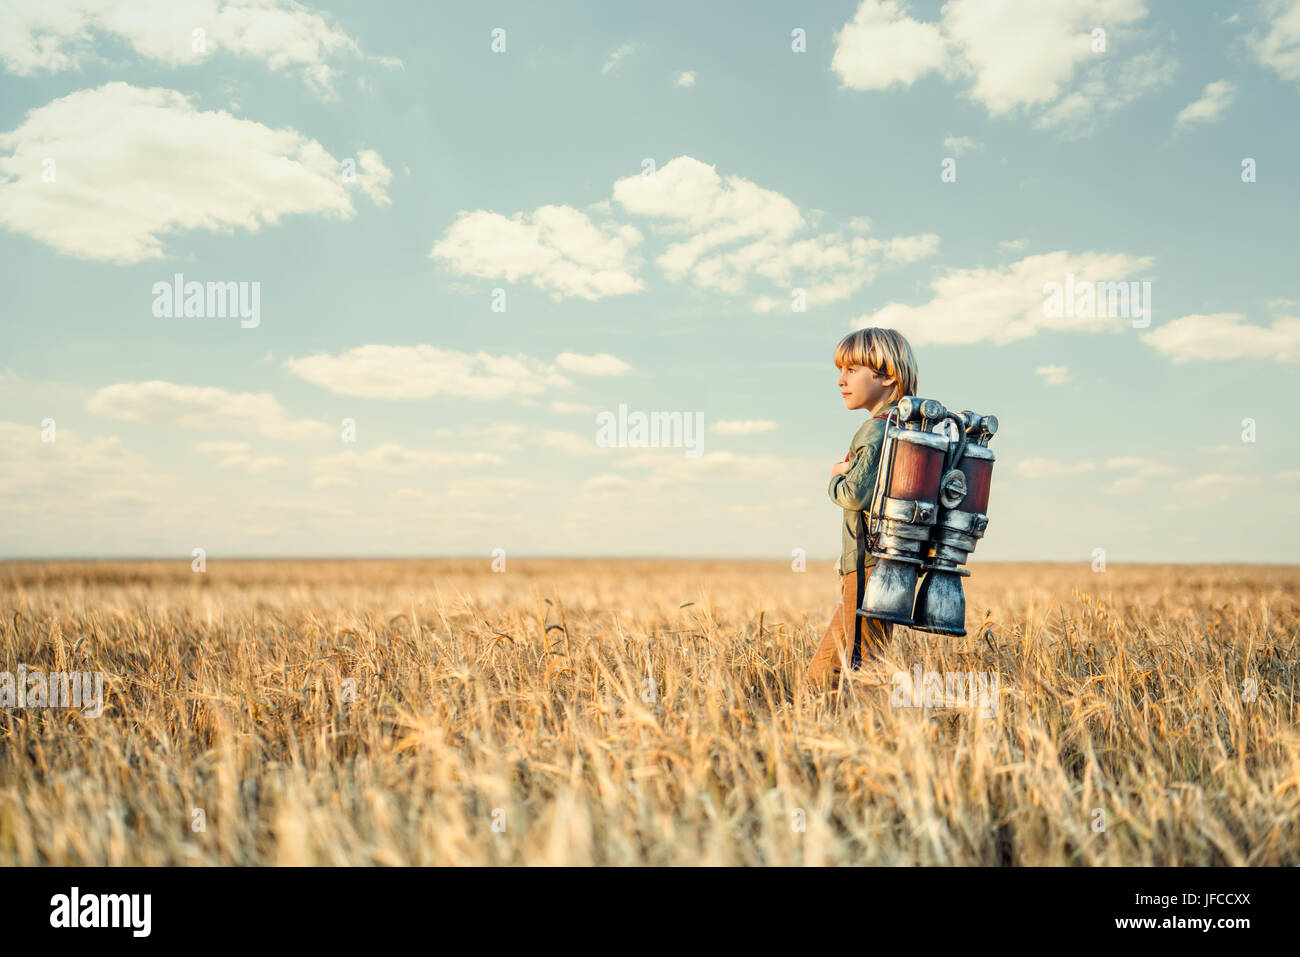 Traveler with a backpack Stock Photo